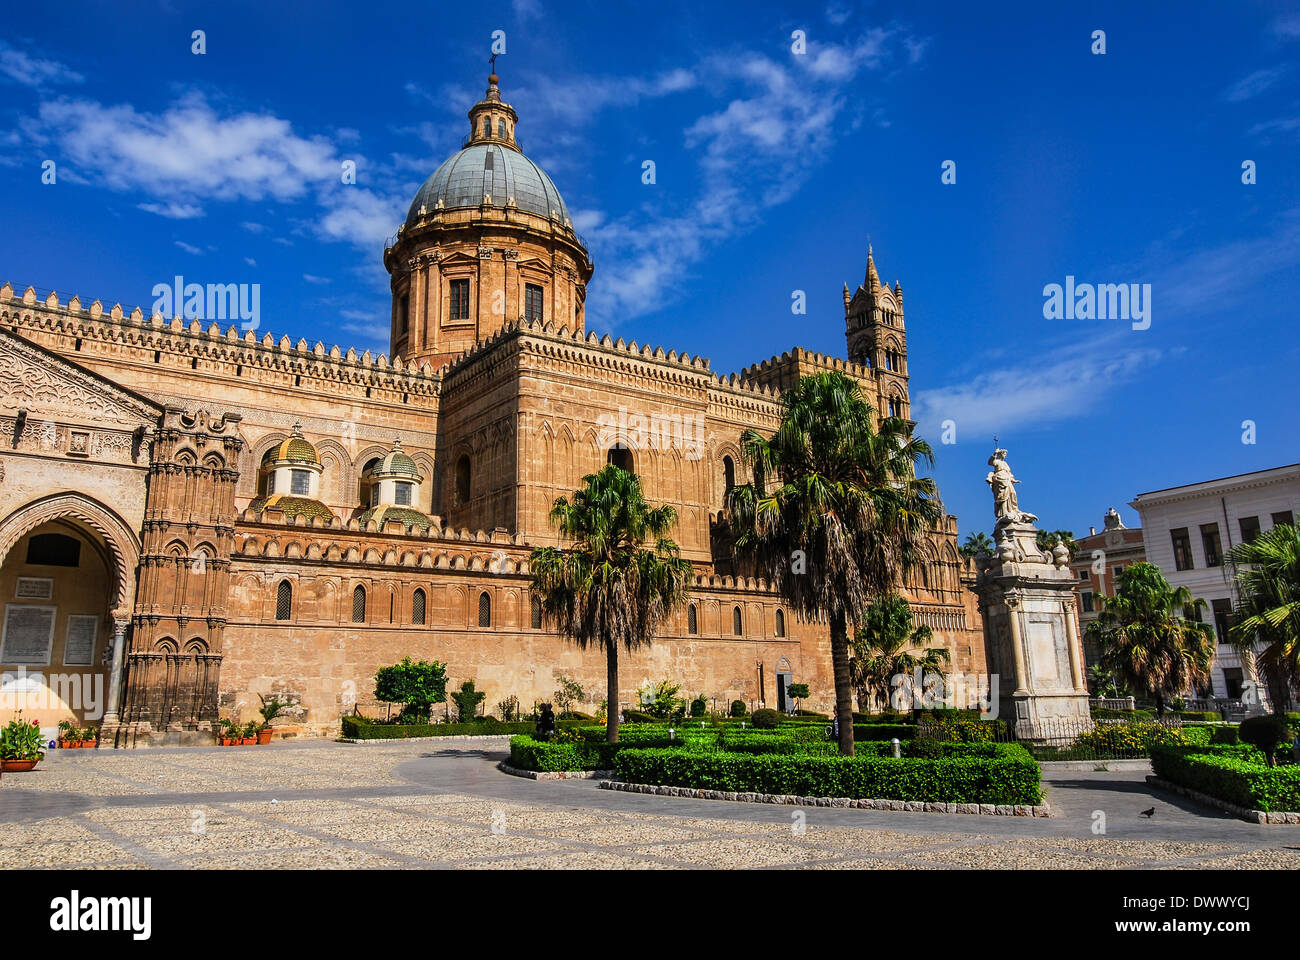 Palermo, Sicily. Cathedral was built in Norman structure in 1179. Santa Maria Assunta Cathedral, landmark of Italy. Stock Photo